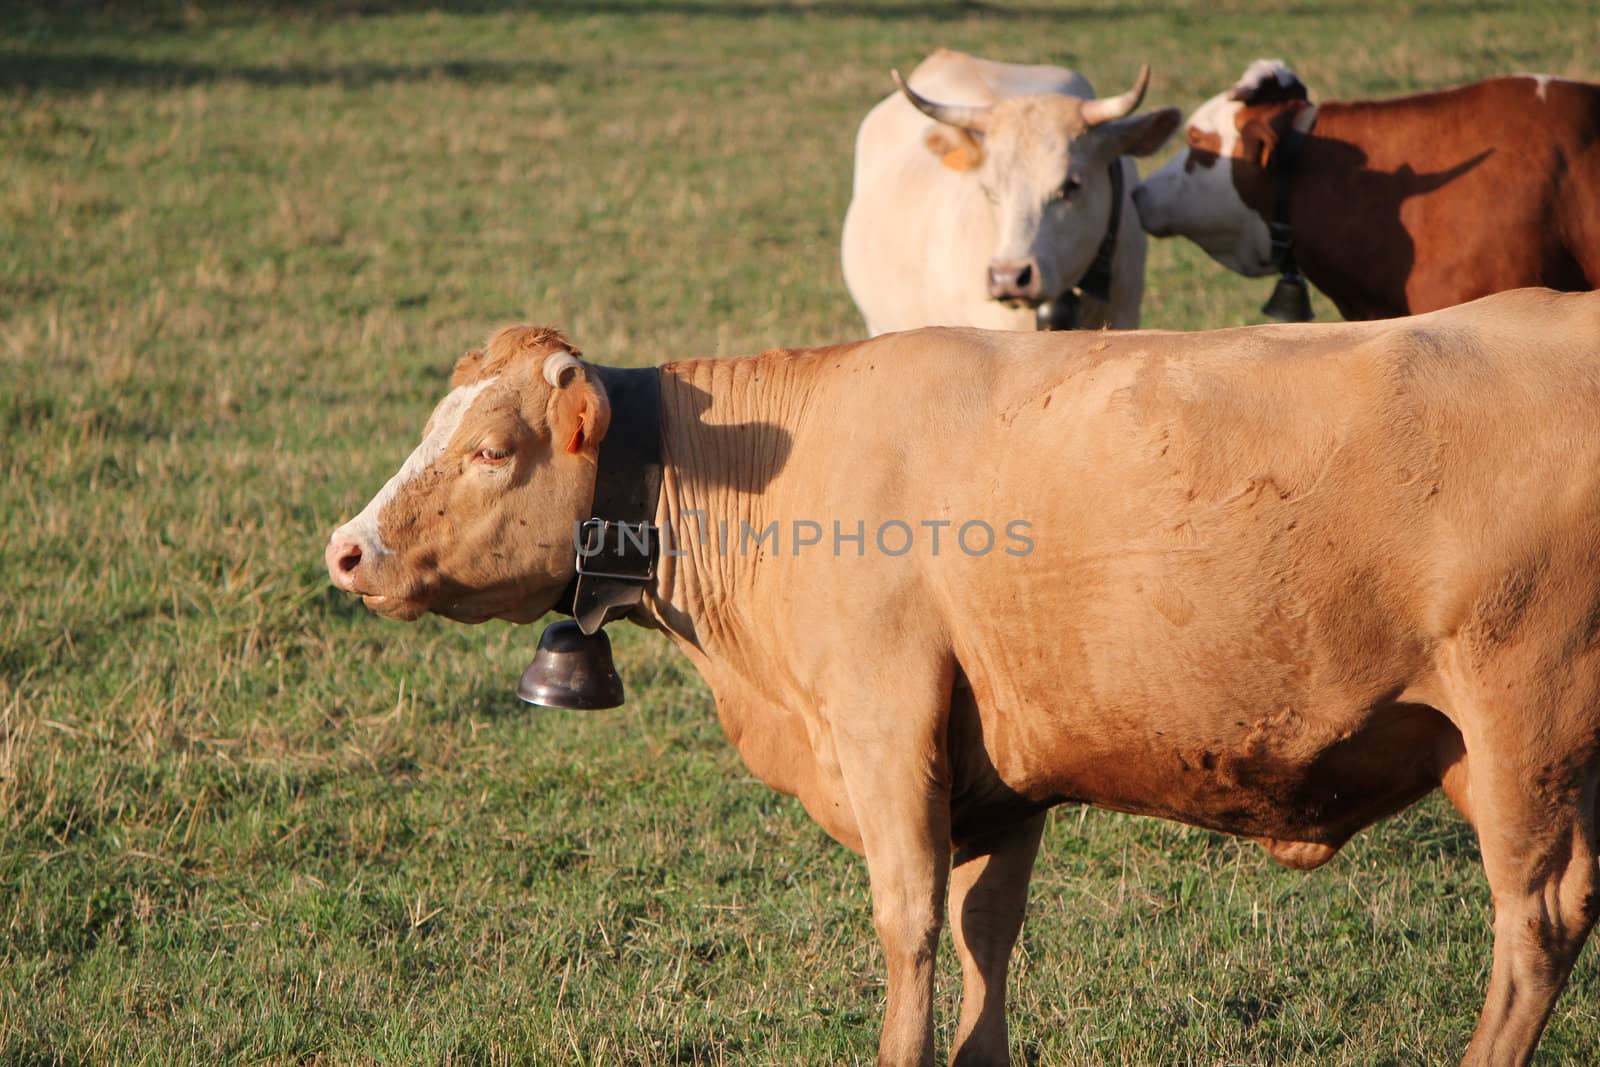 A clear brown cow wearing a bell and ignoring the gossip of the others cows behind